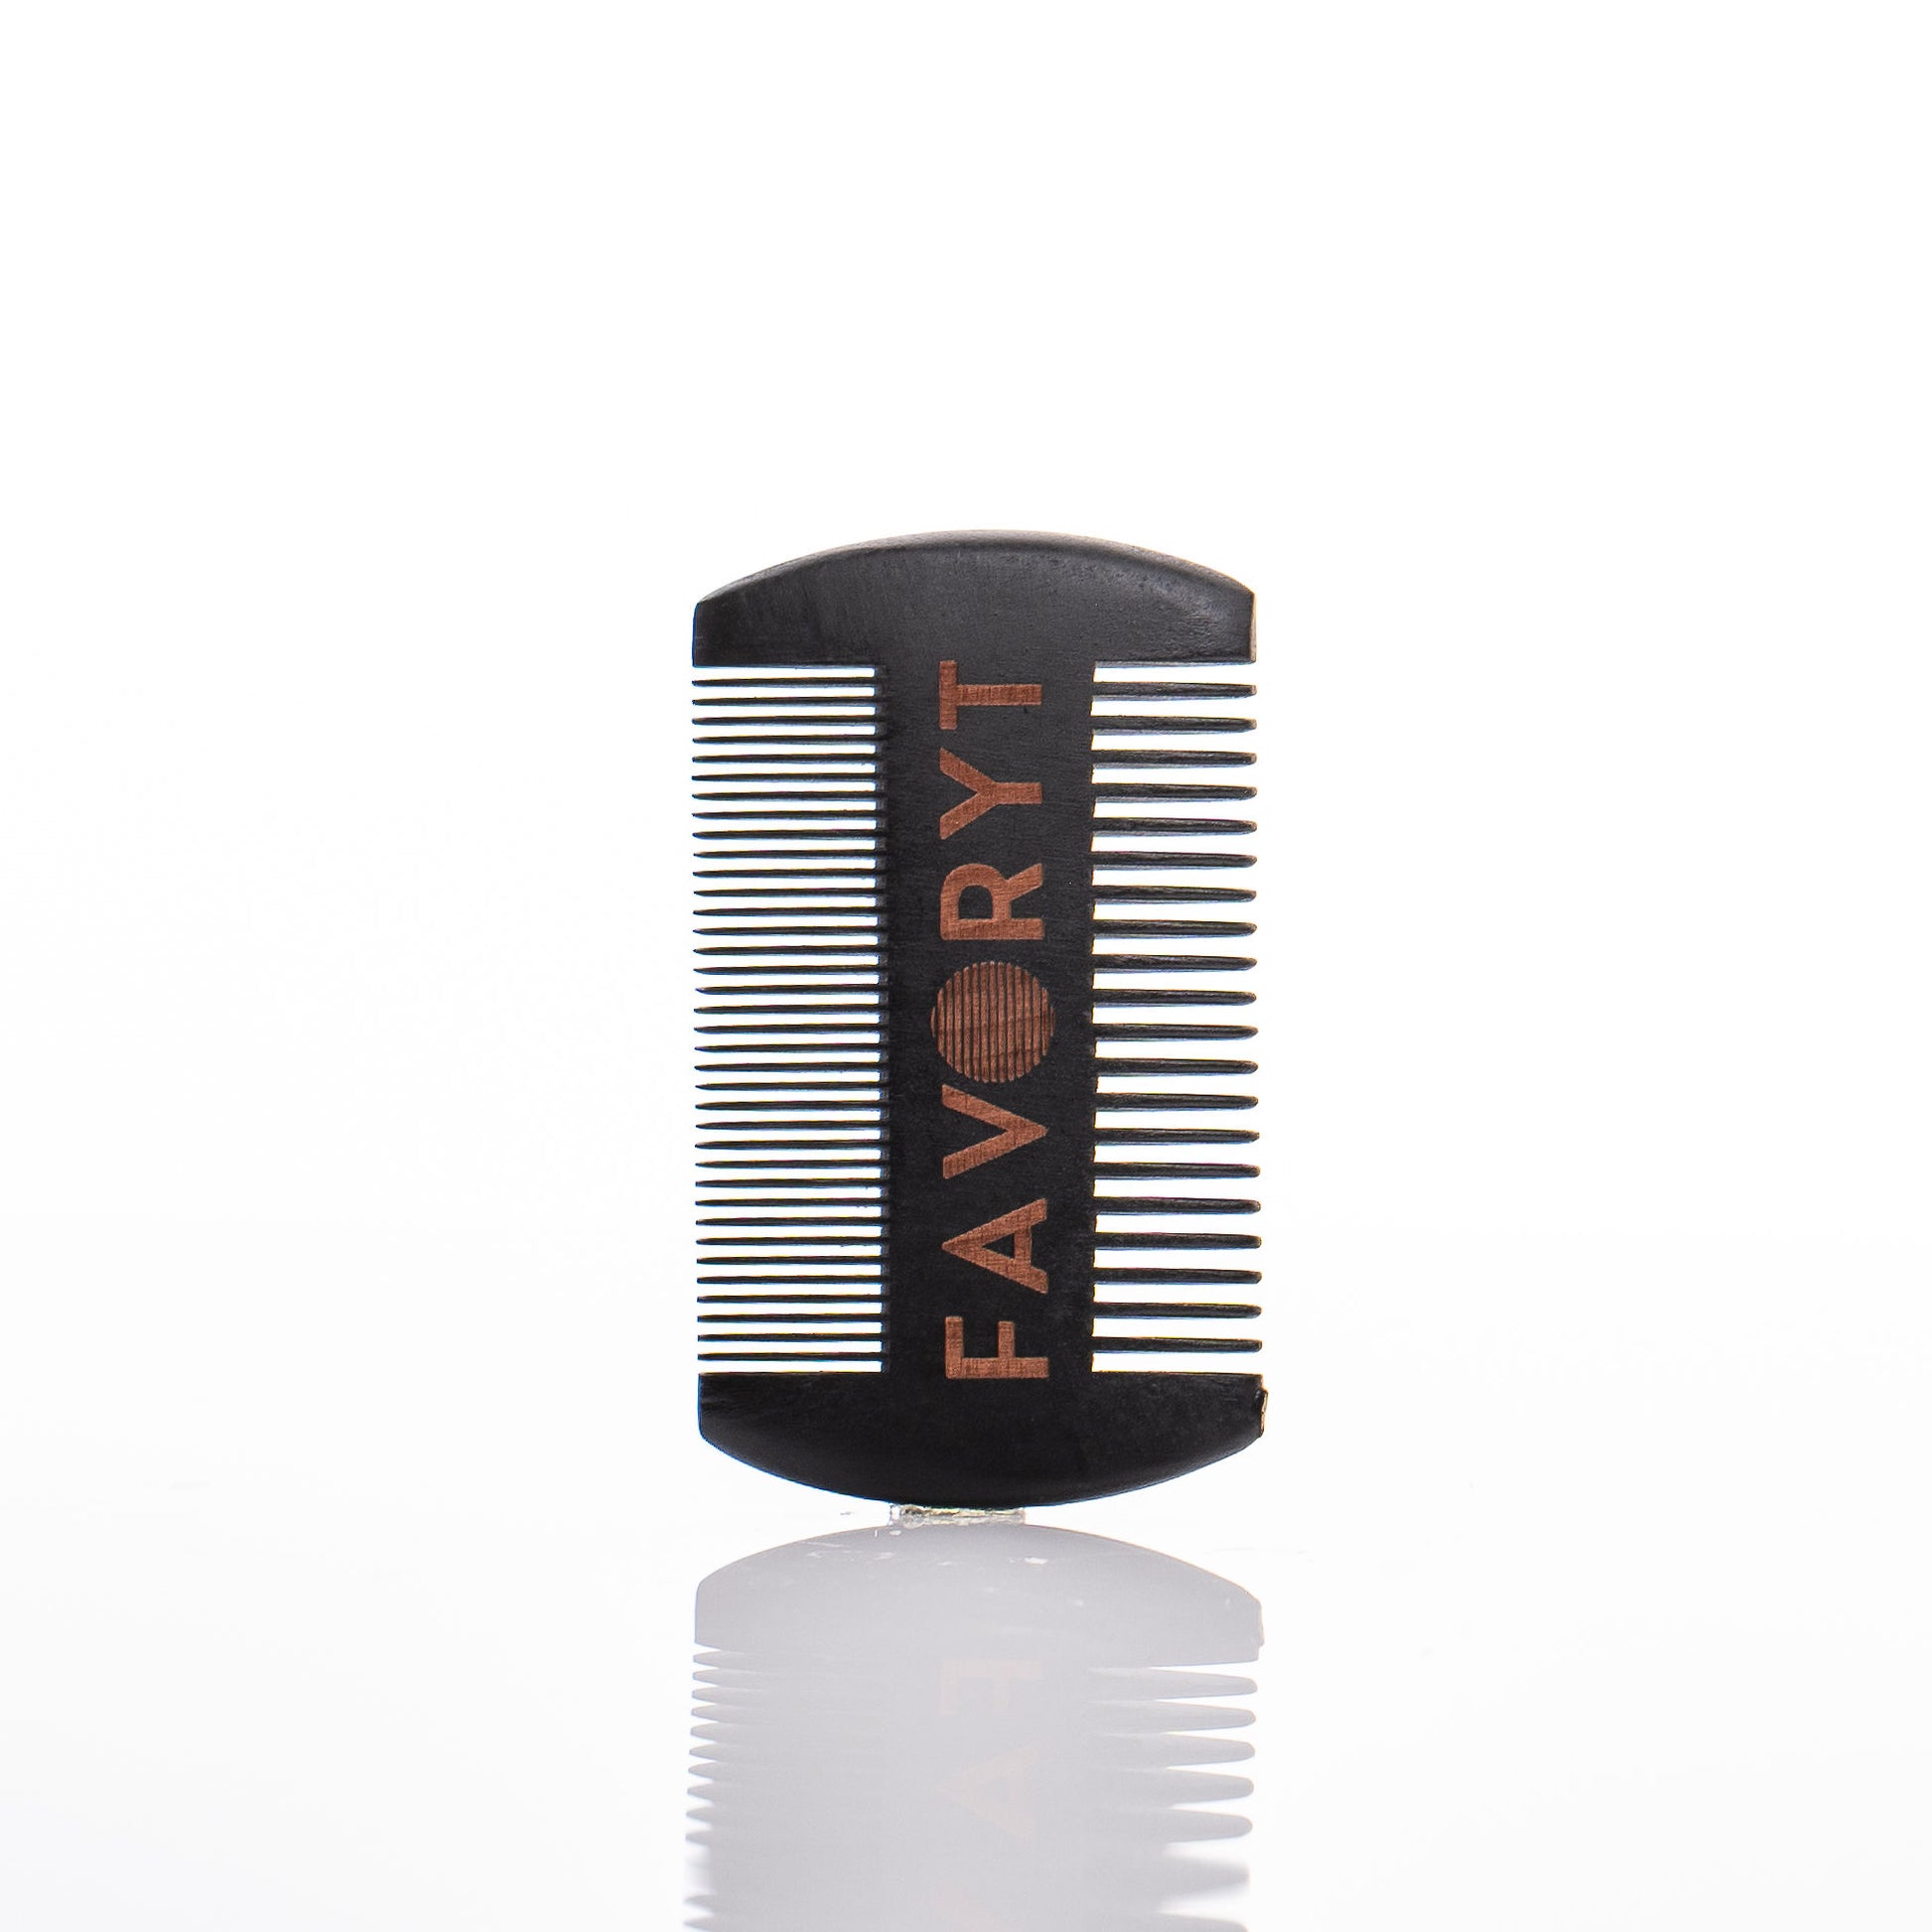 FAVORYT Double-Sided Beard Comb - FAVORYT BRAND